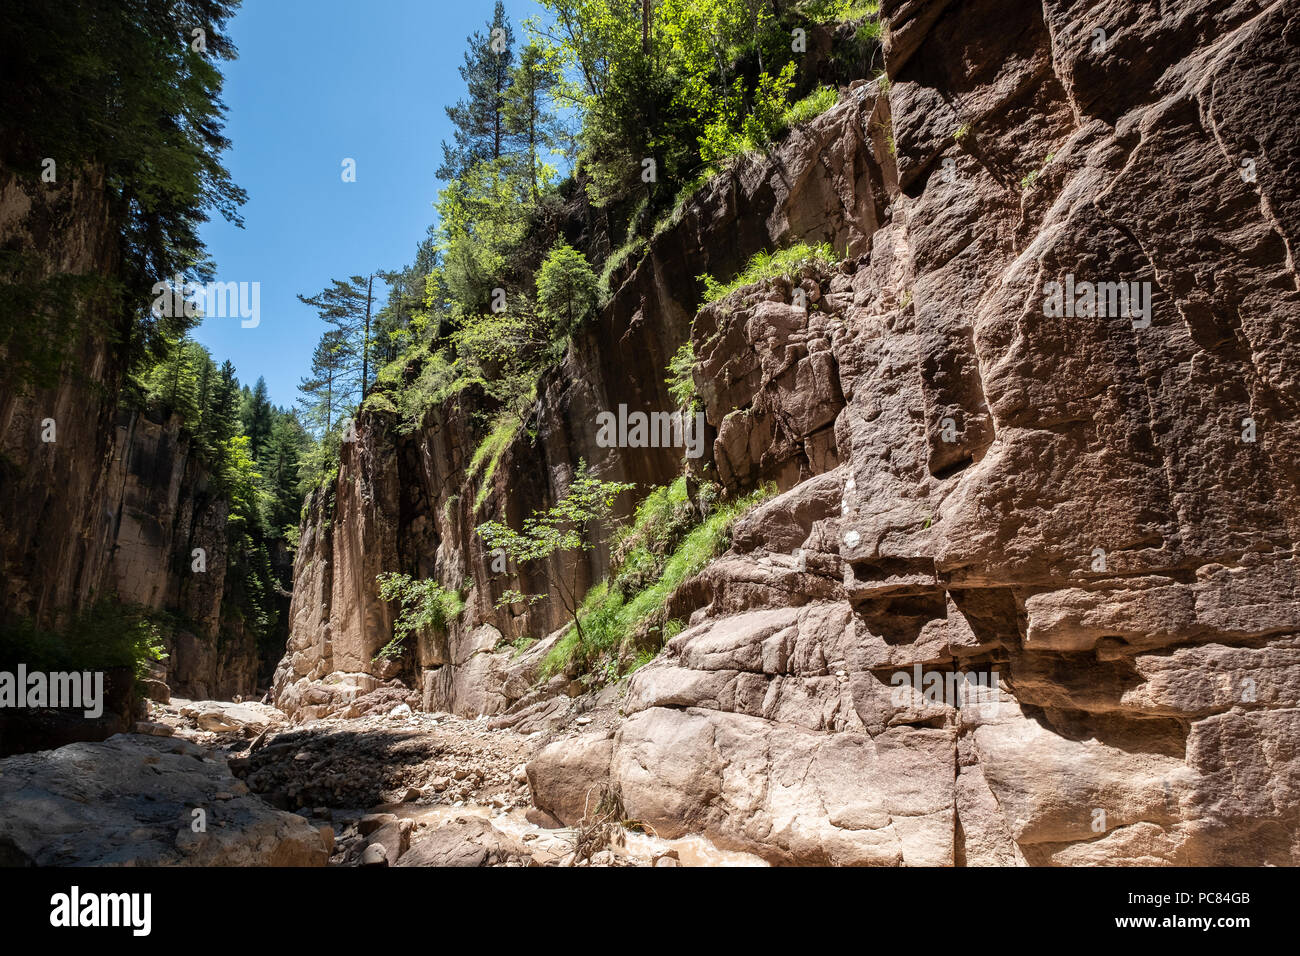 Bletterbach canyon, Bletterbach Geopark, Aldein-Radein, South Tyrol, Italy Stock Photo